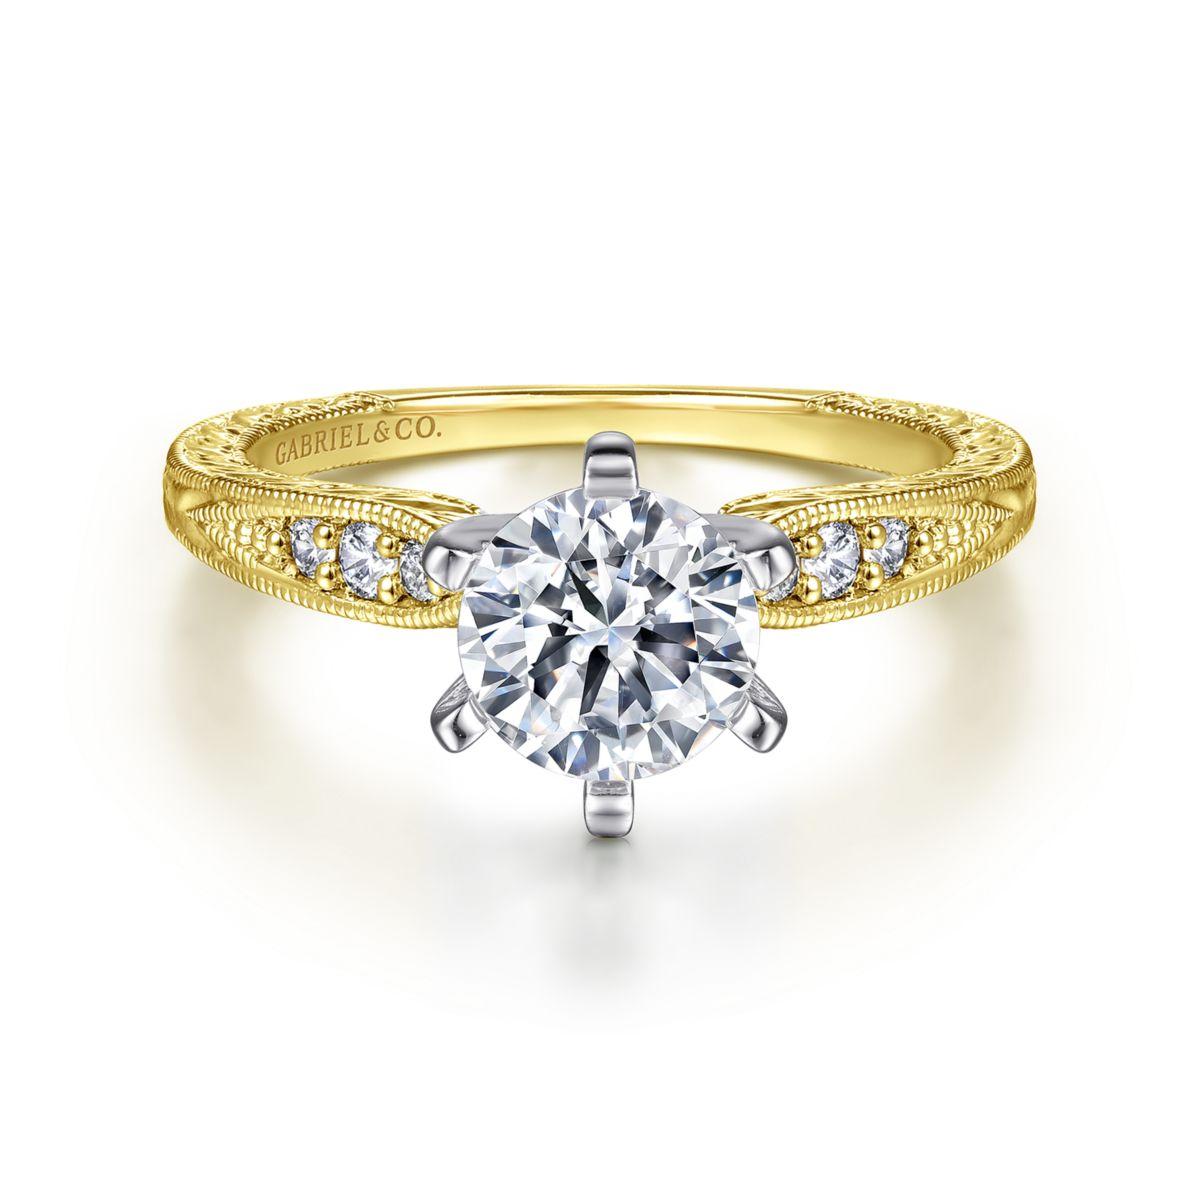 14 KT Straight Engagement Ring